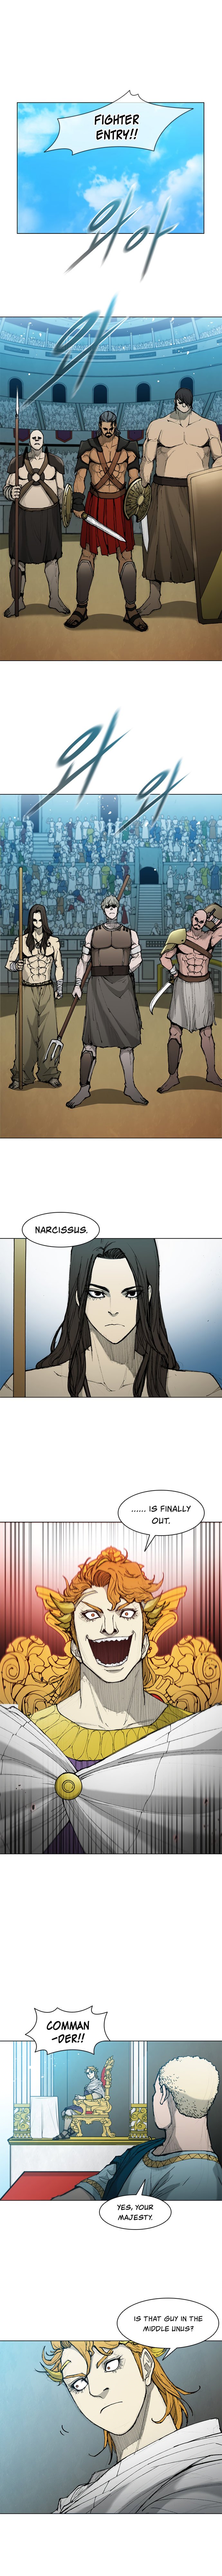 long-way-of-the-warrior-chap-42-2